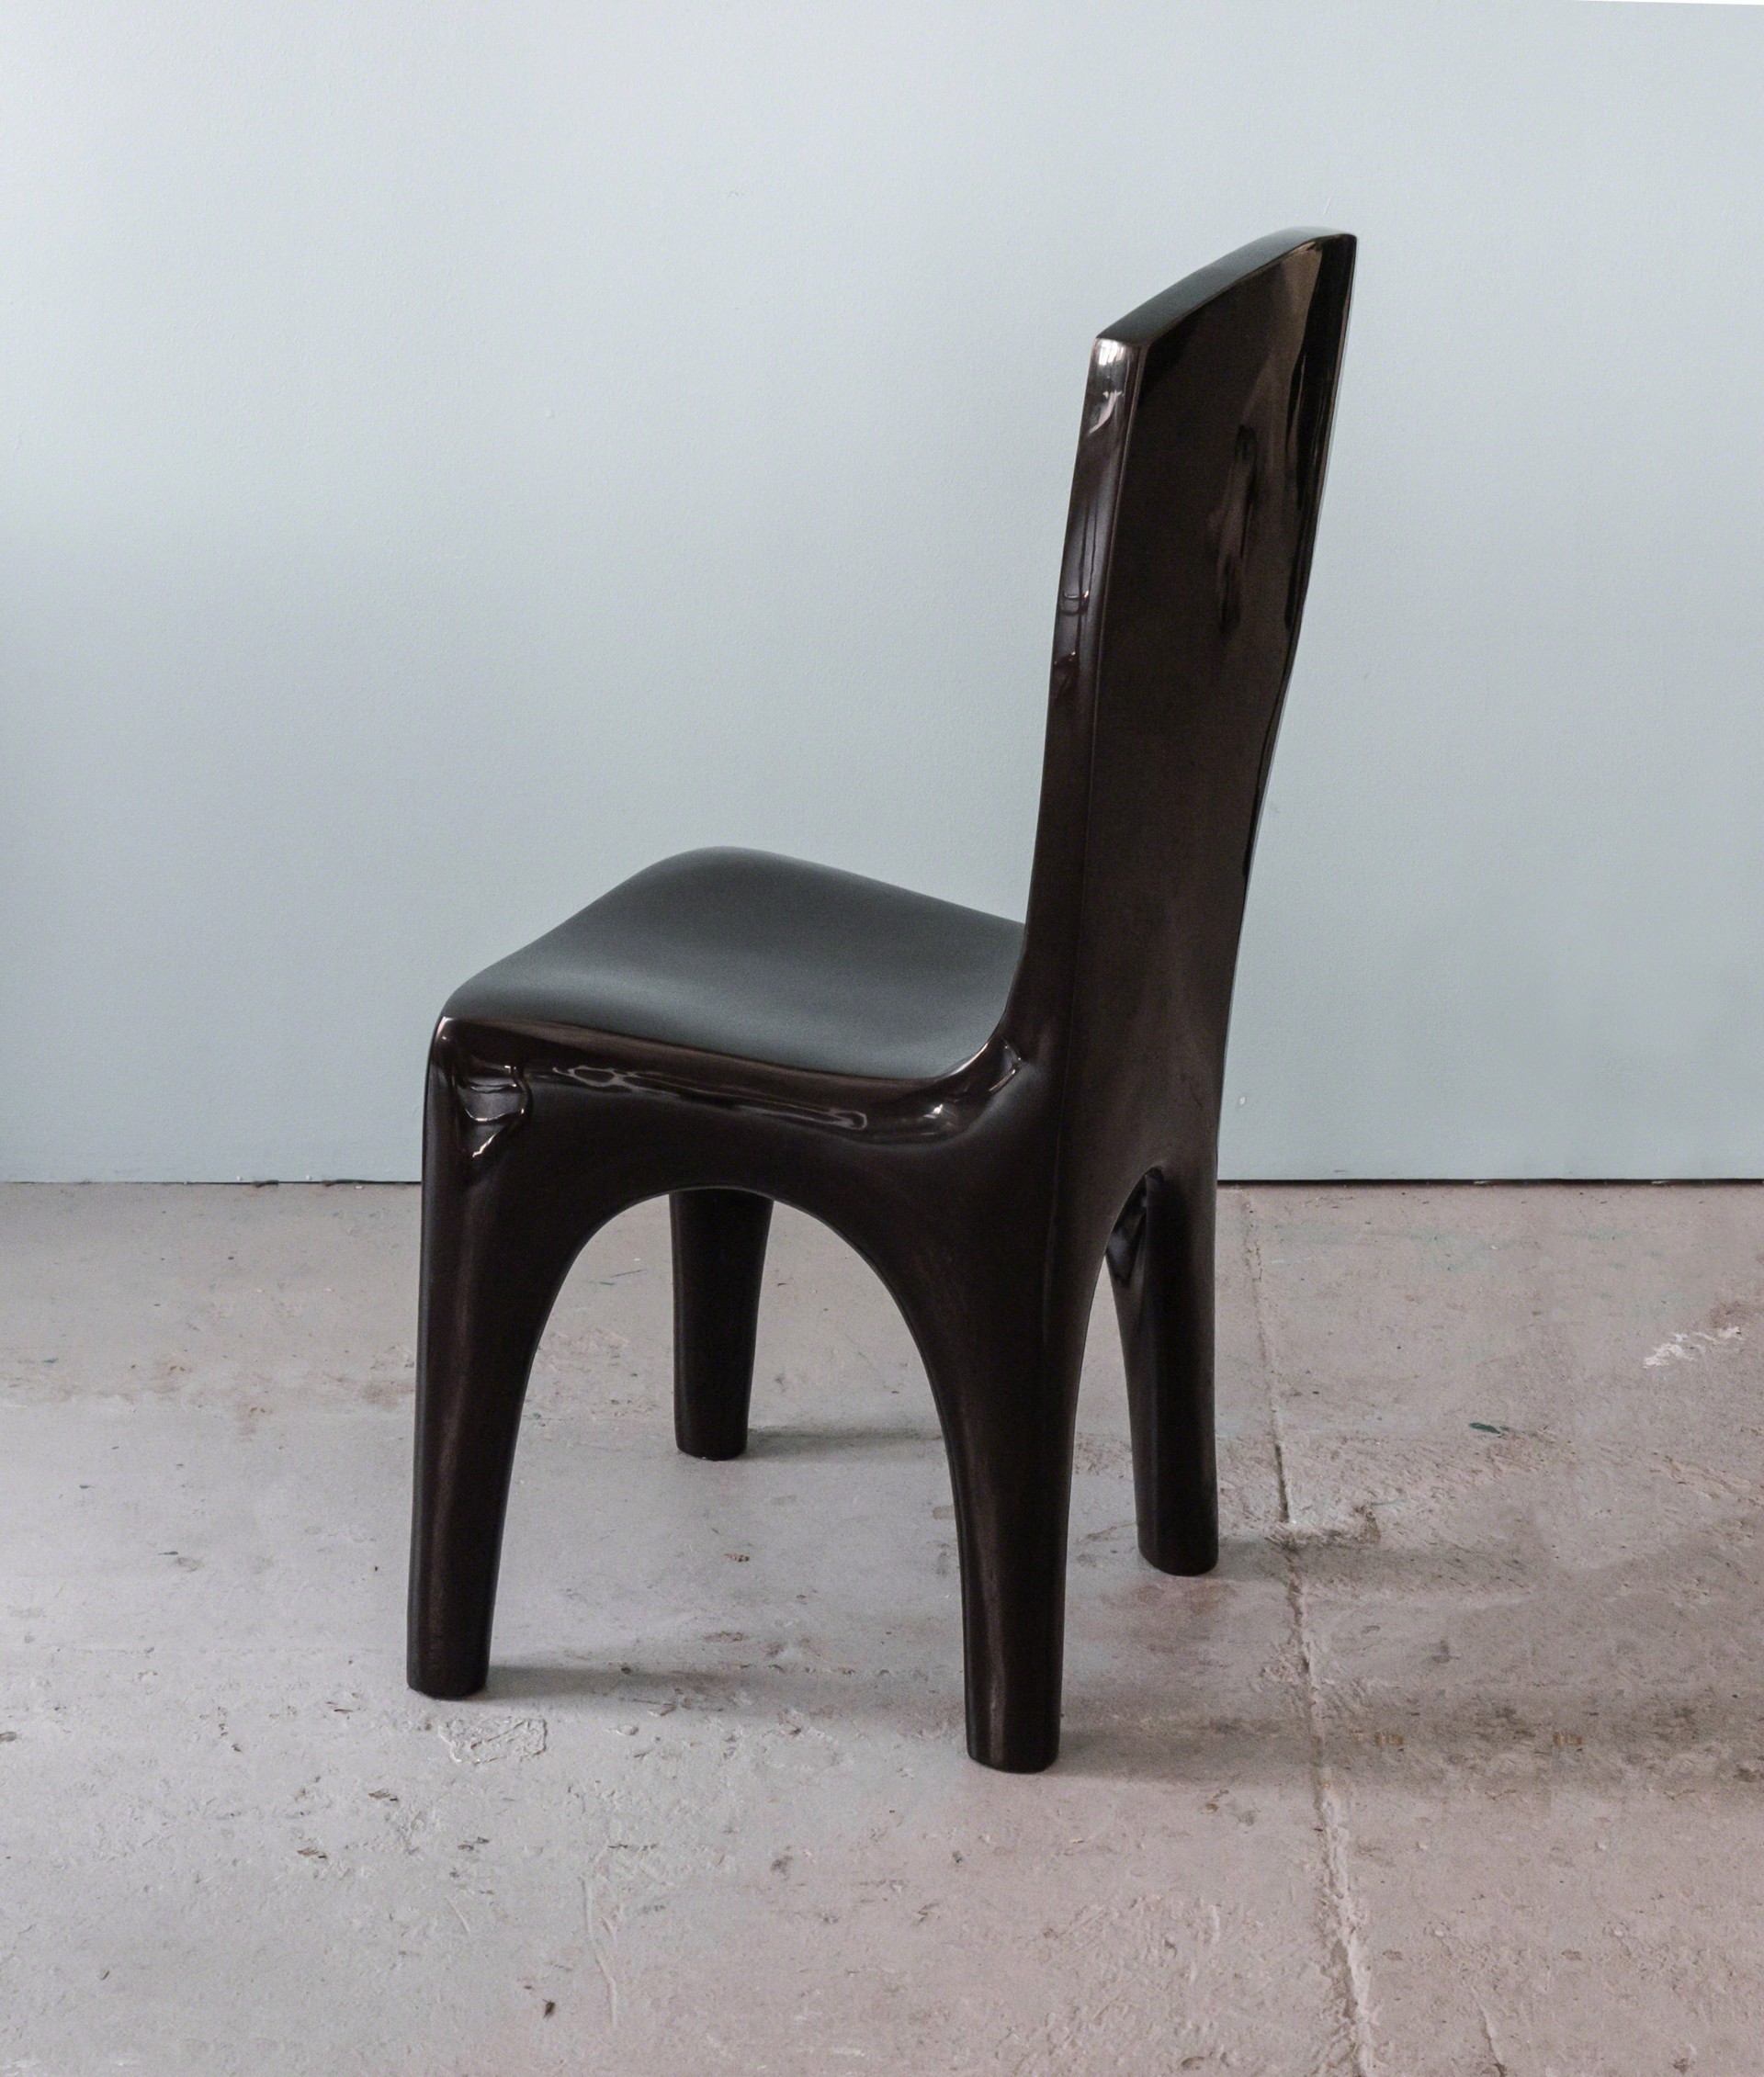 "Toro"  Black chair by Jacques Jarrige